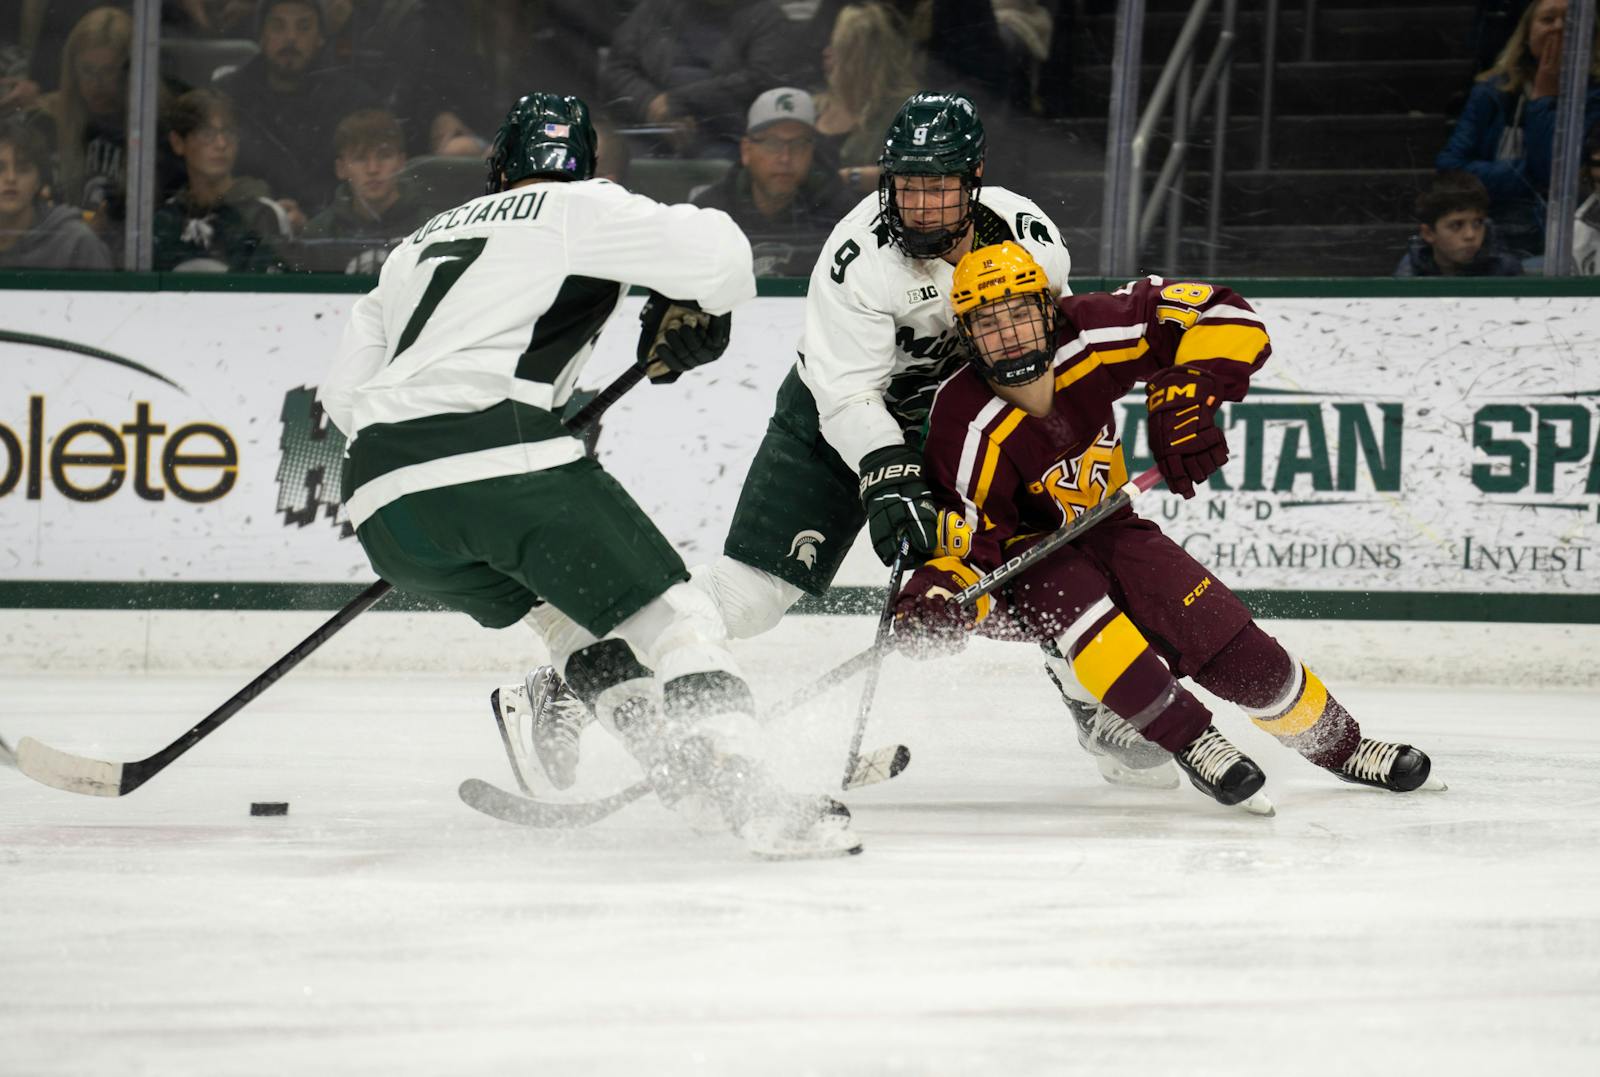 Gophers forward Matthew Knies discusses playing hockey in Arizona